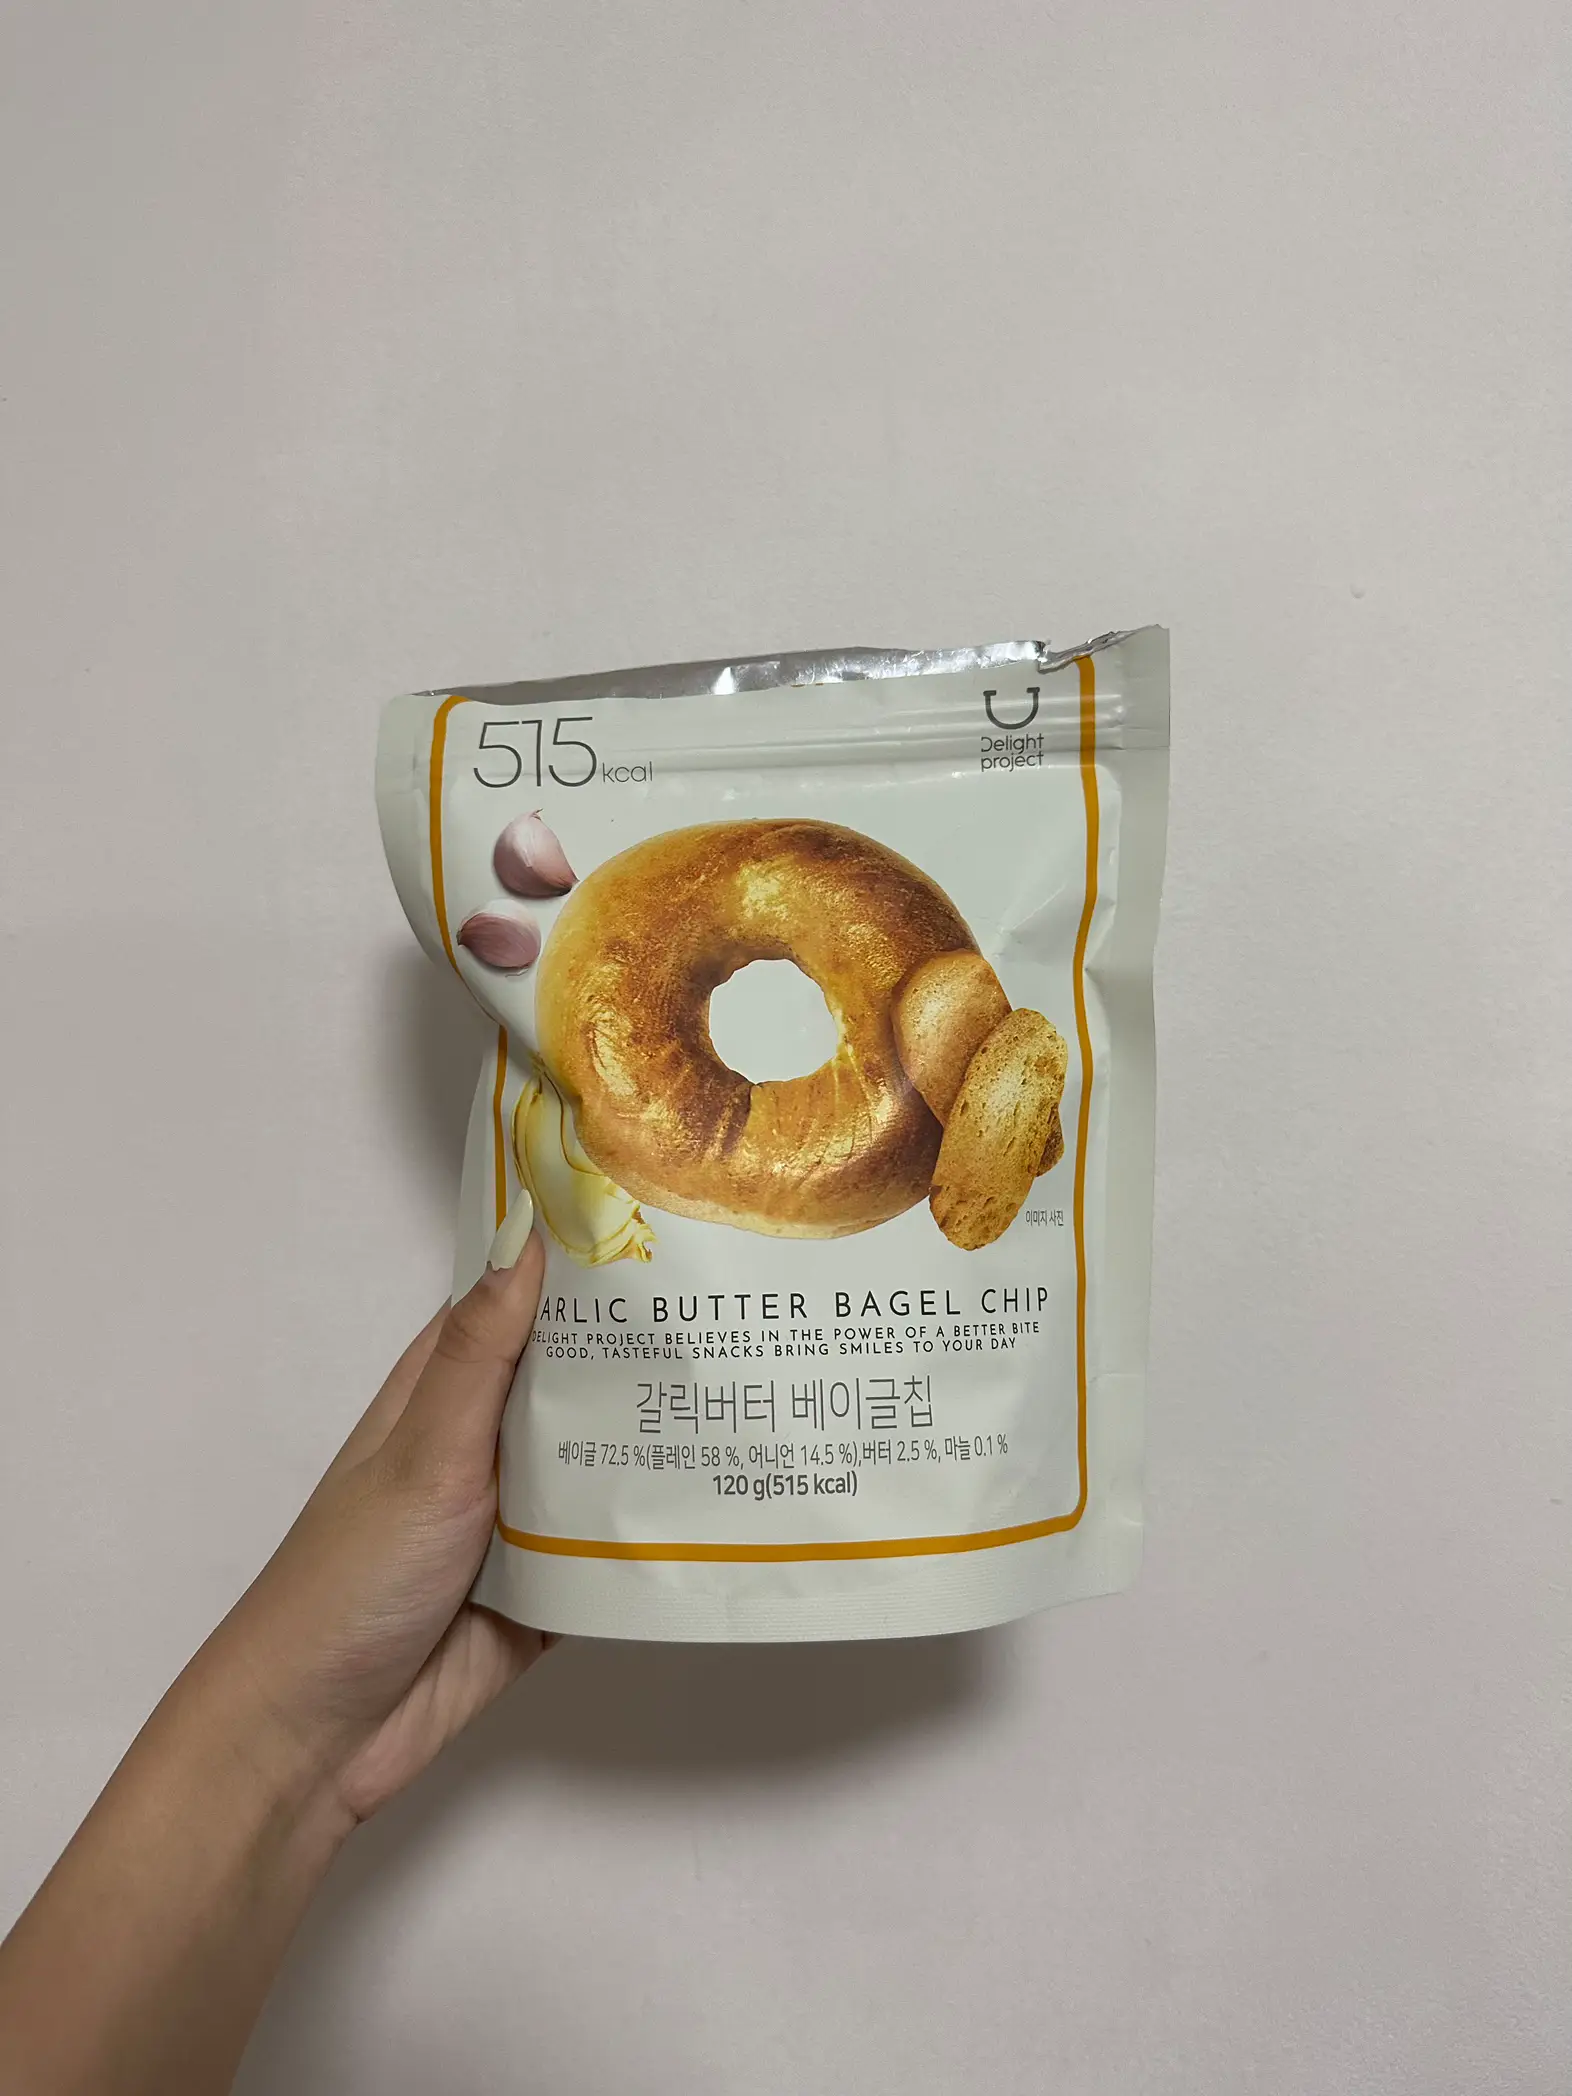 TRYING THE OLIVE YOUNG BAGEL CHIPS 😋🥯's images(2)